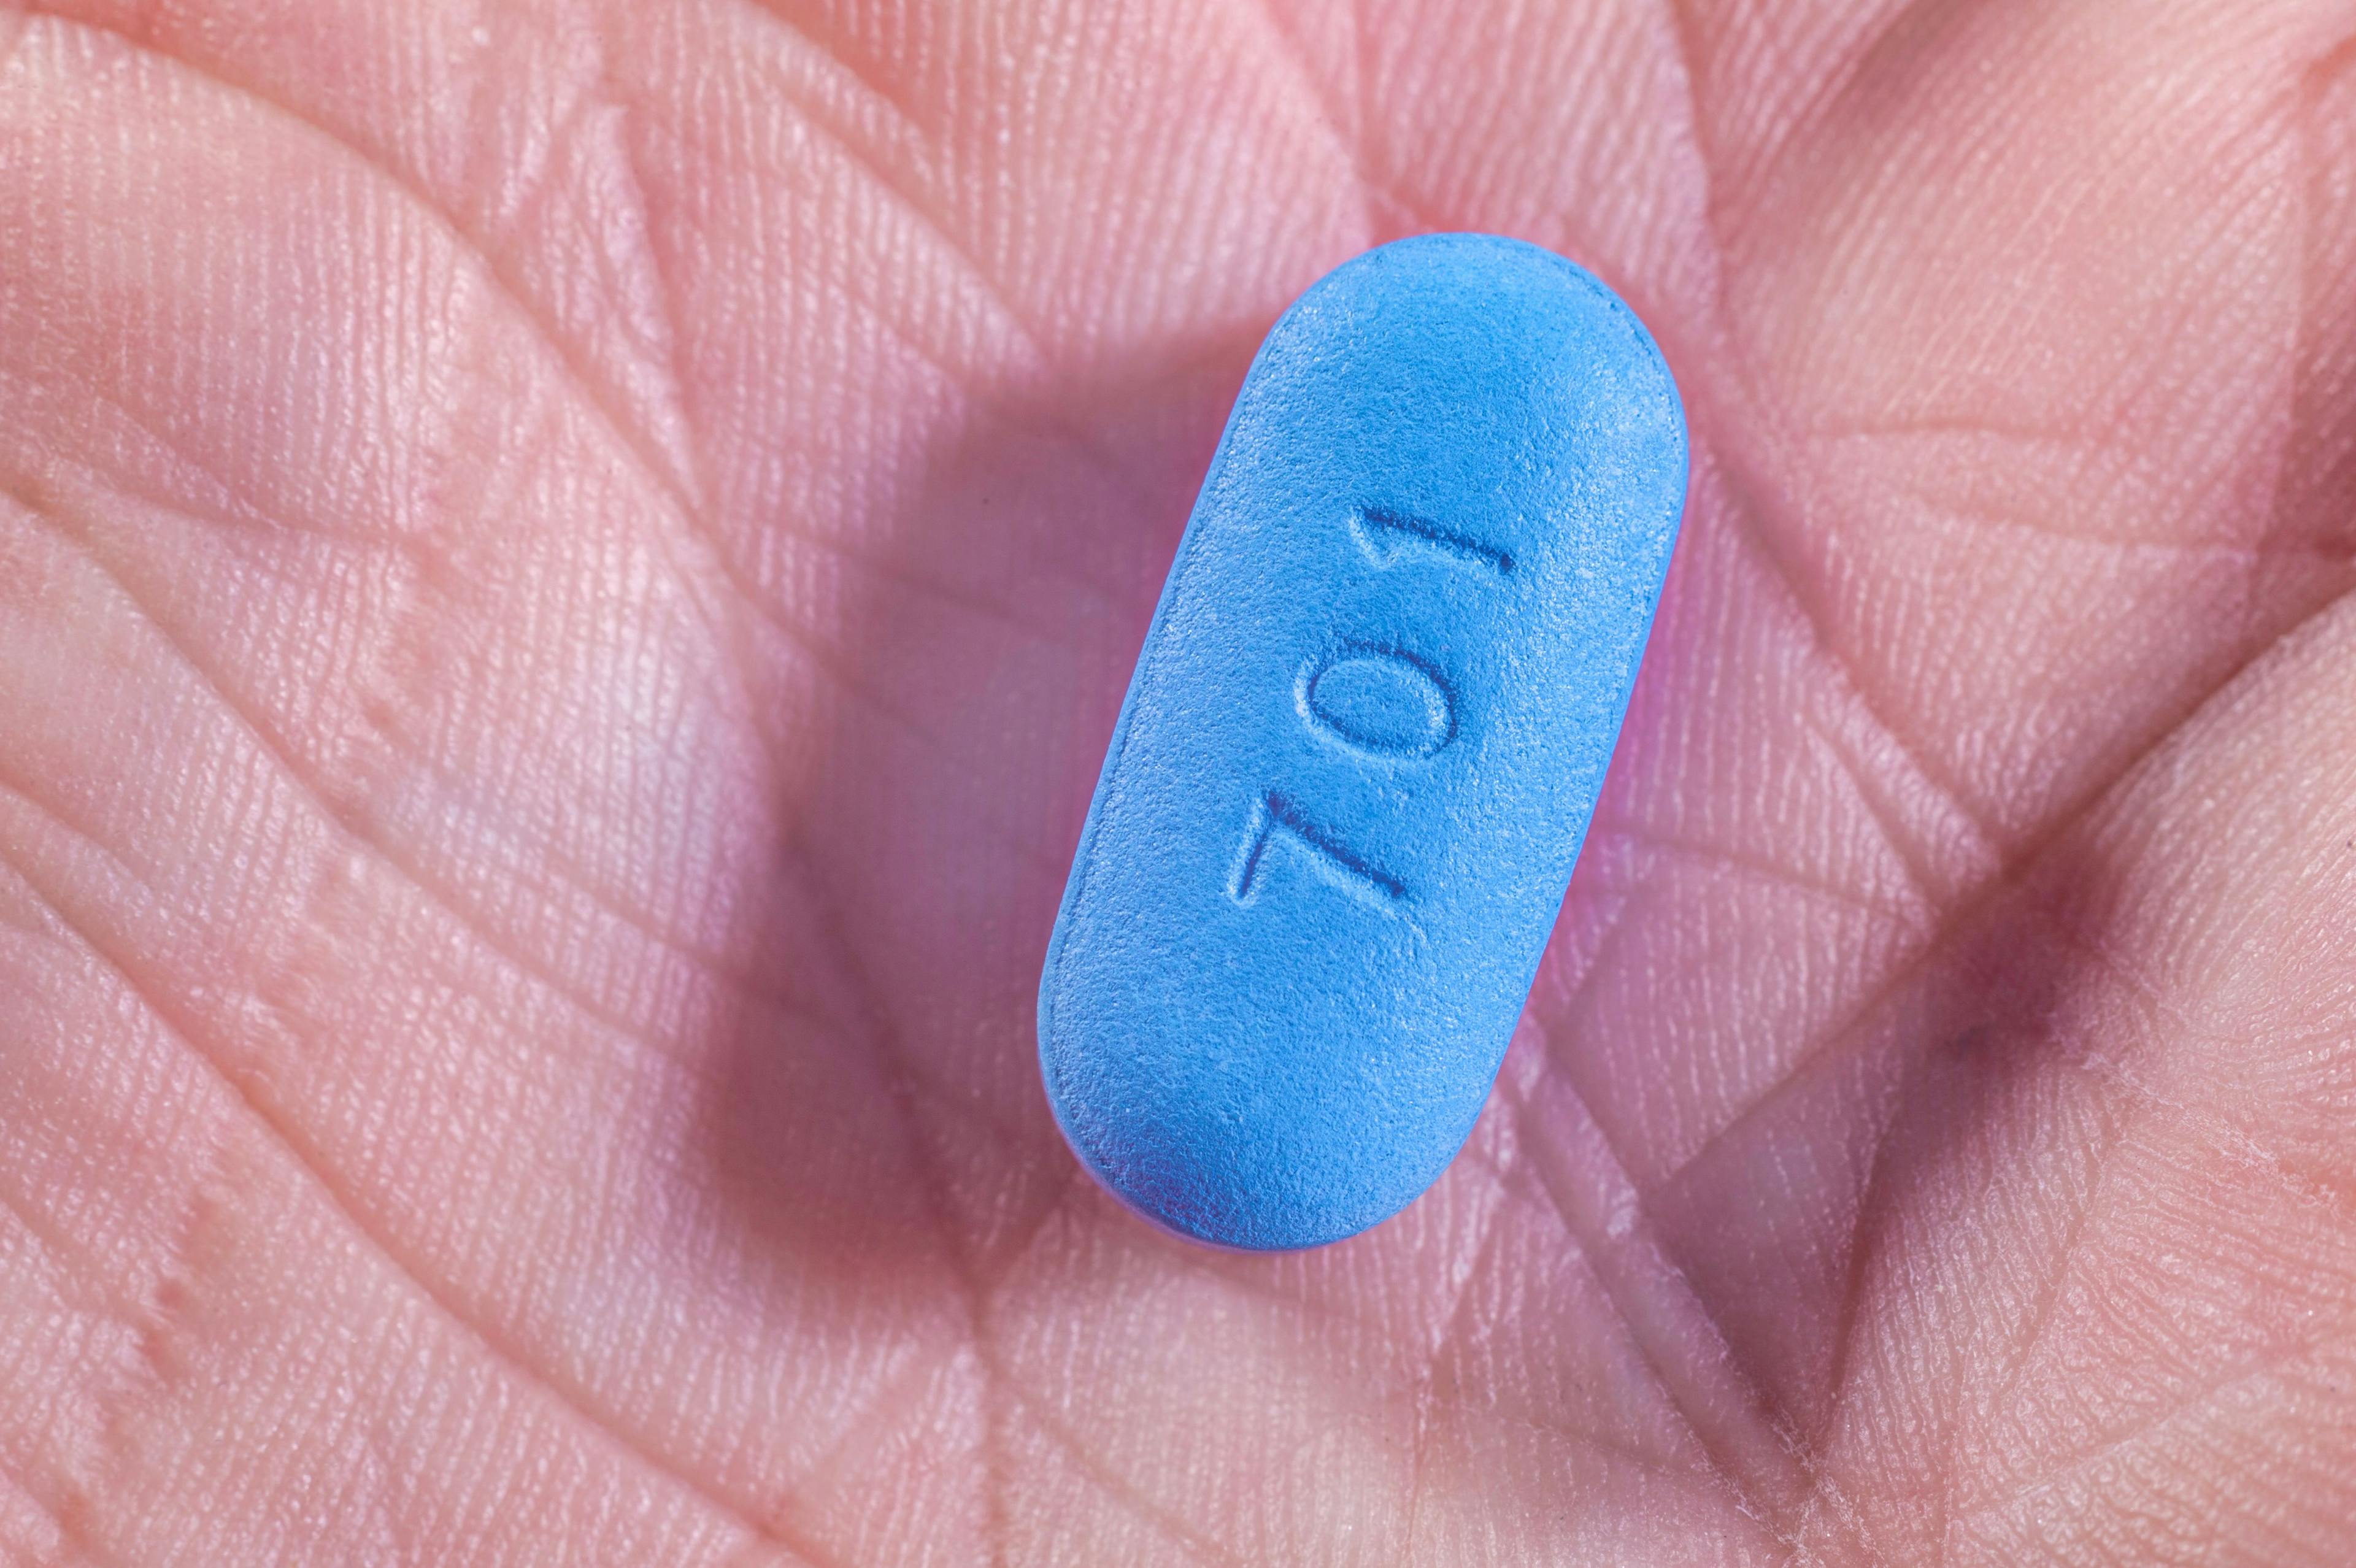 Hand holding Pill used for Pre-Exposure Prophylaxis (PrEP) to prevent HIV | Image credit: mbruxelle - stock.adobe.com